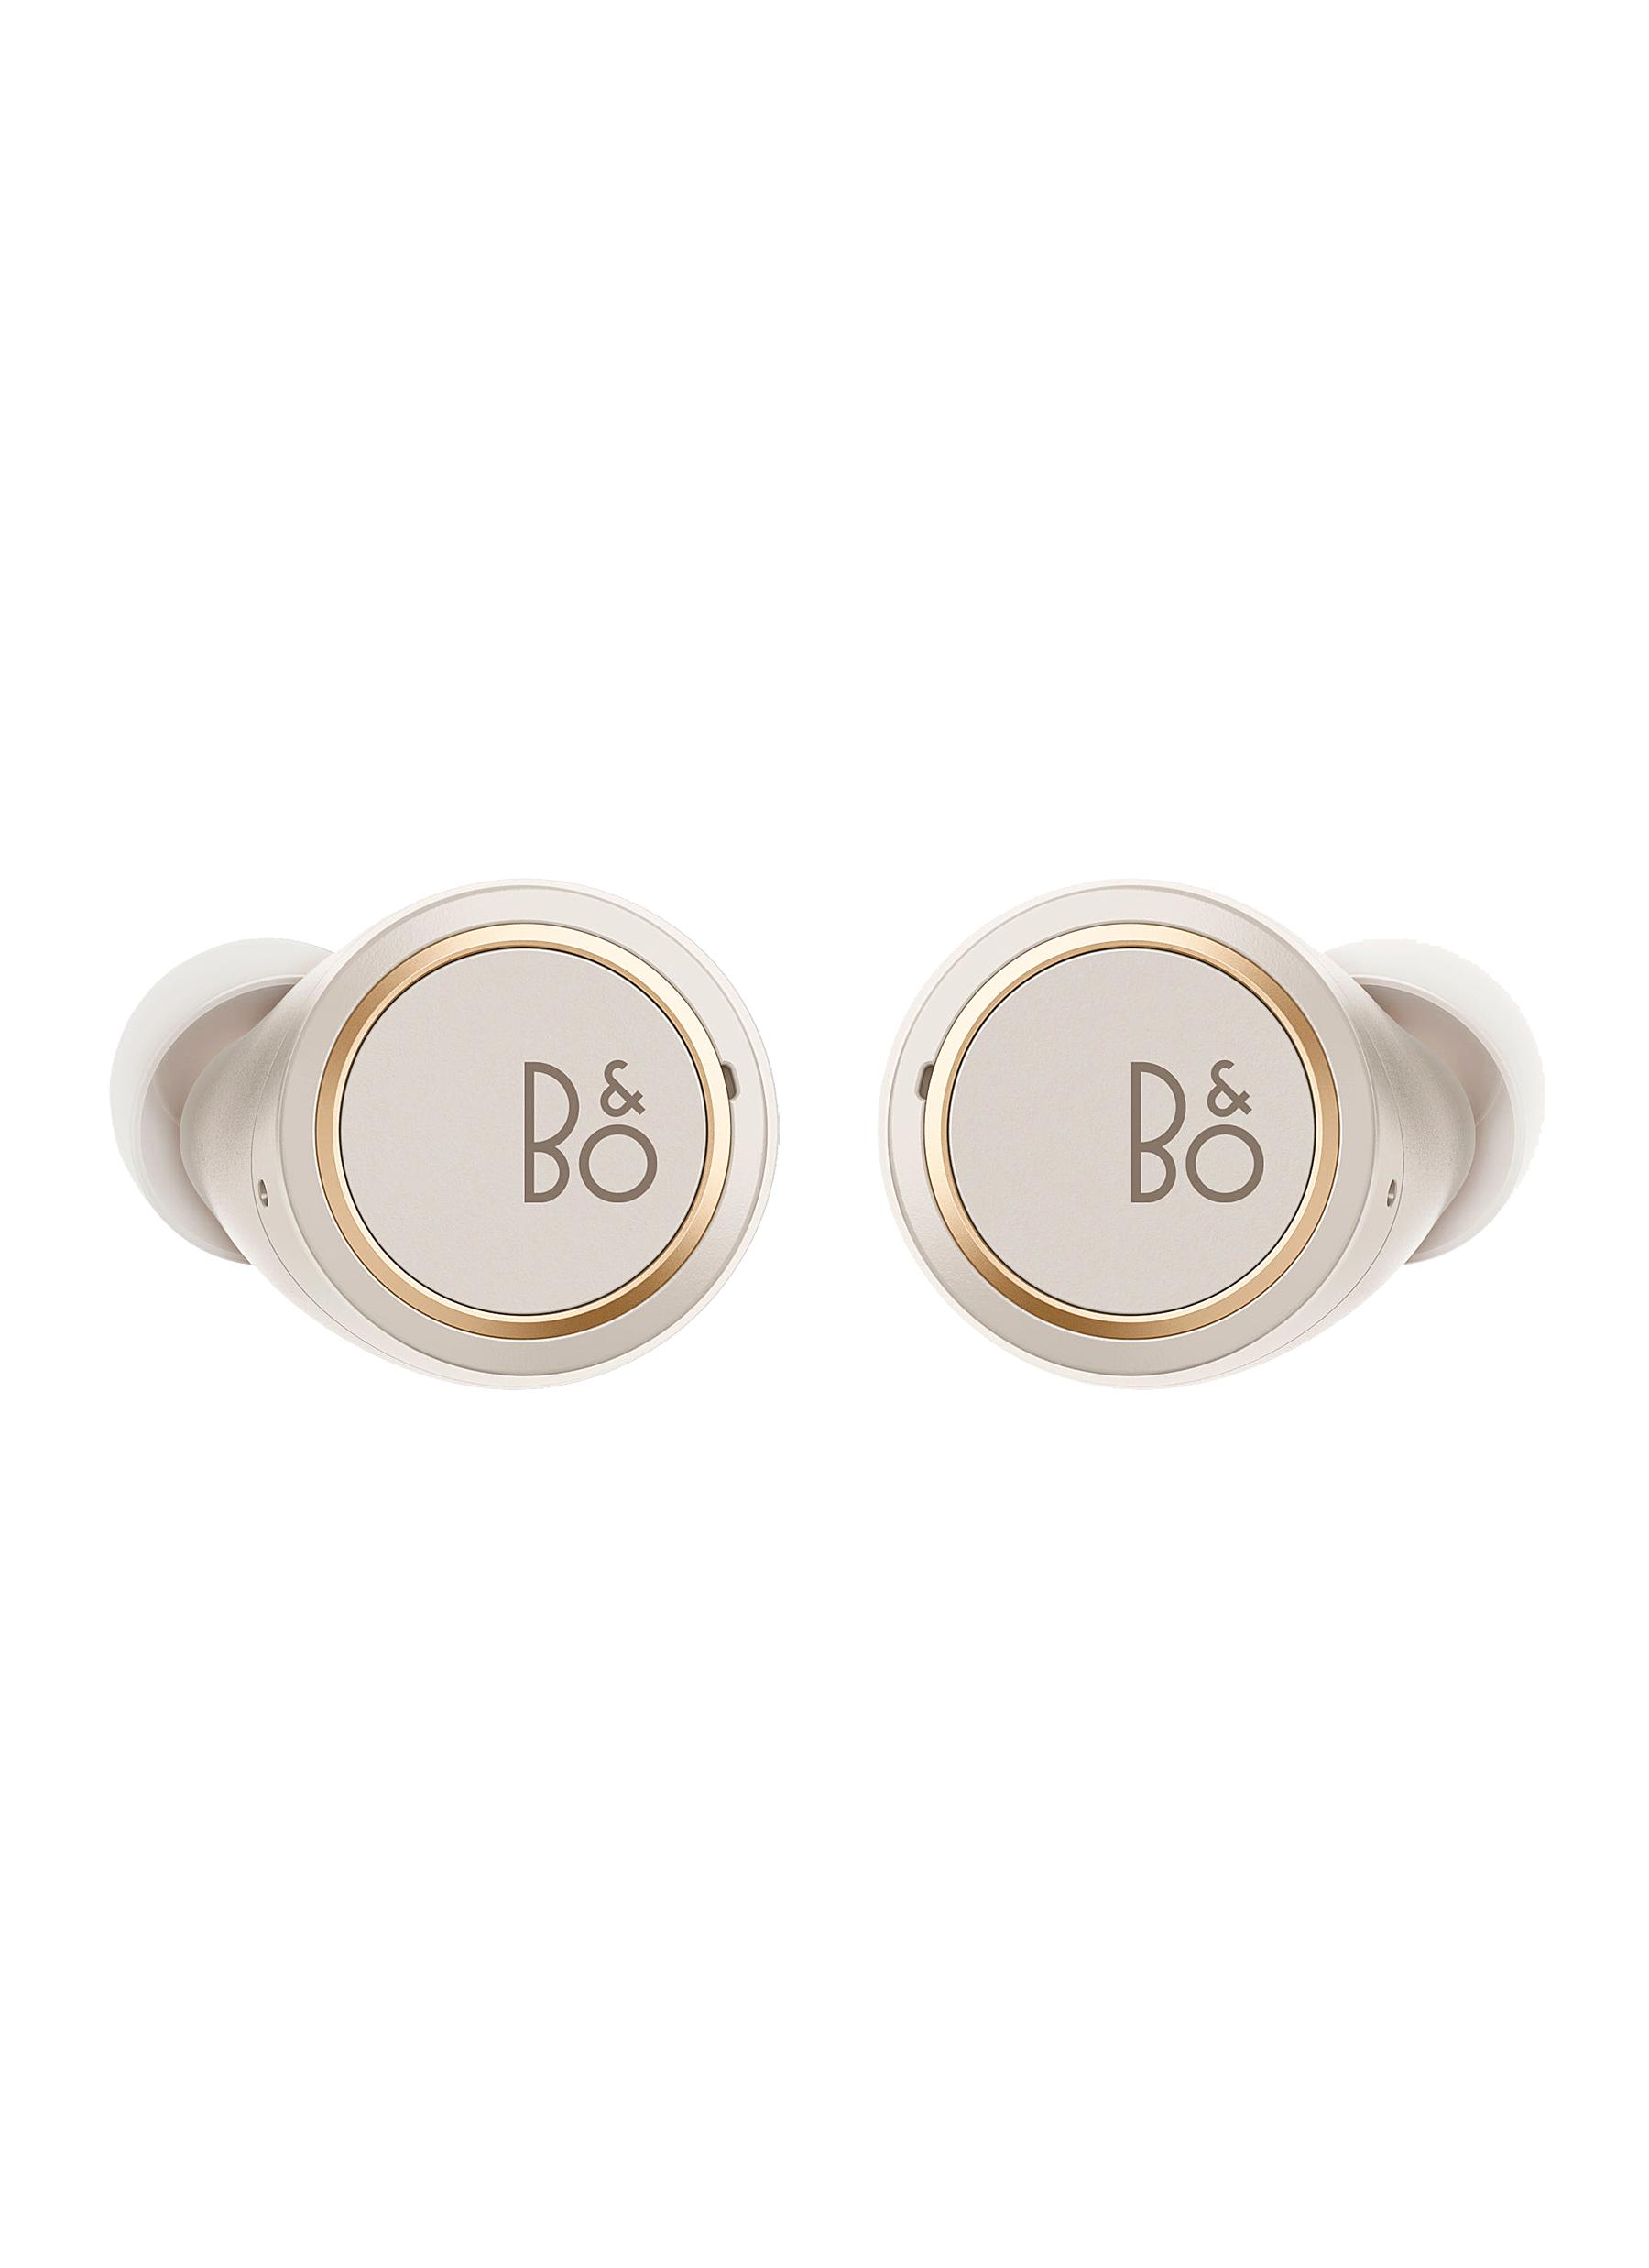 Bang & Olufsen Beoplay E8 Third Generation Wireless In-ear Earbuds - Gold